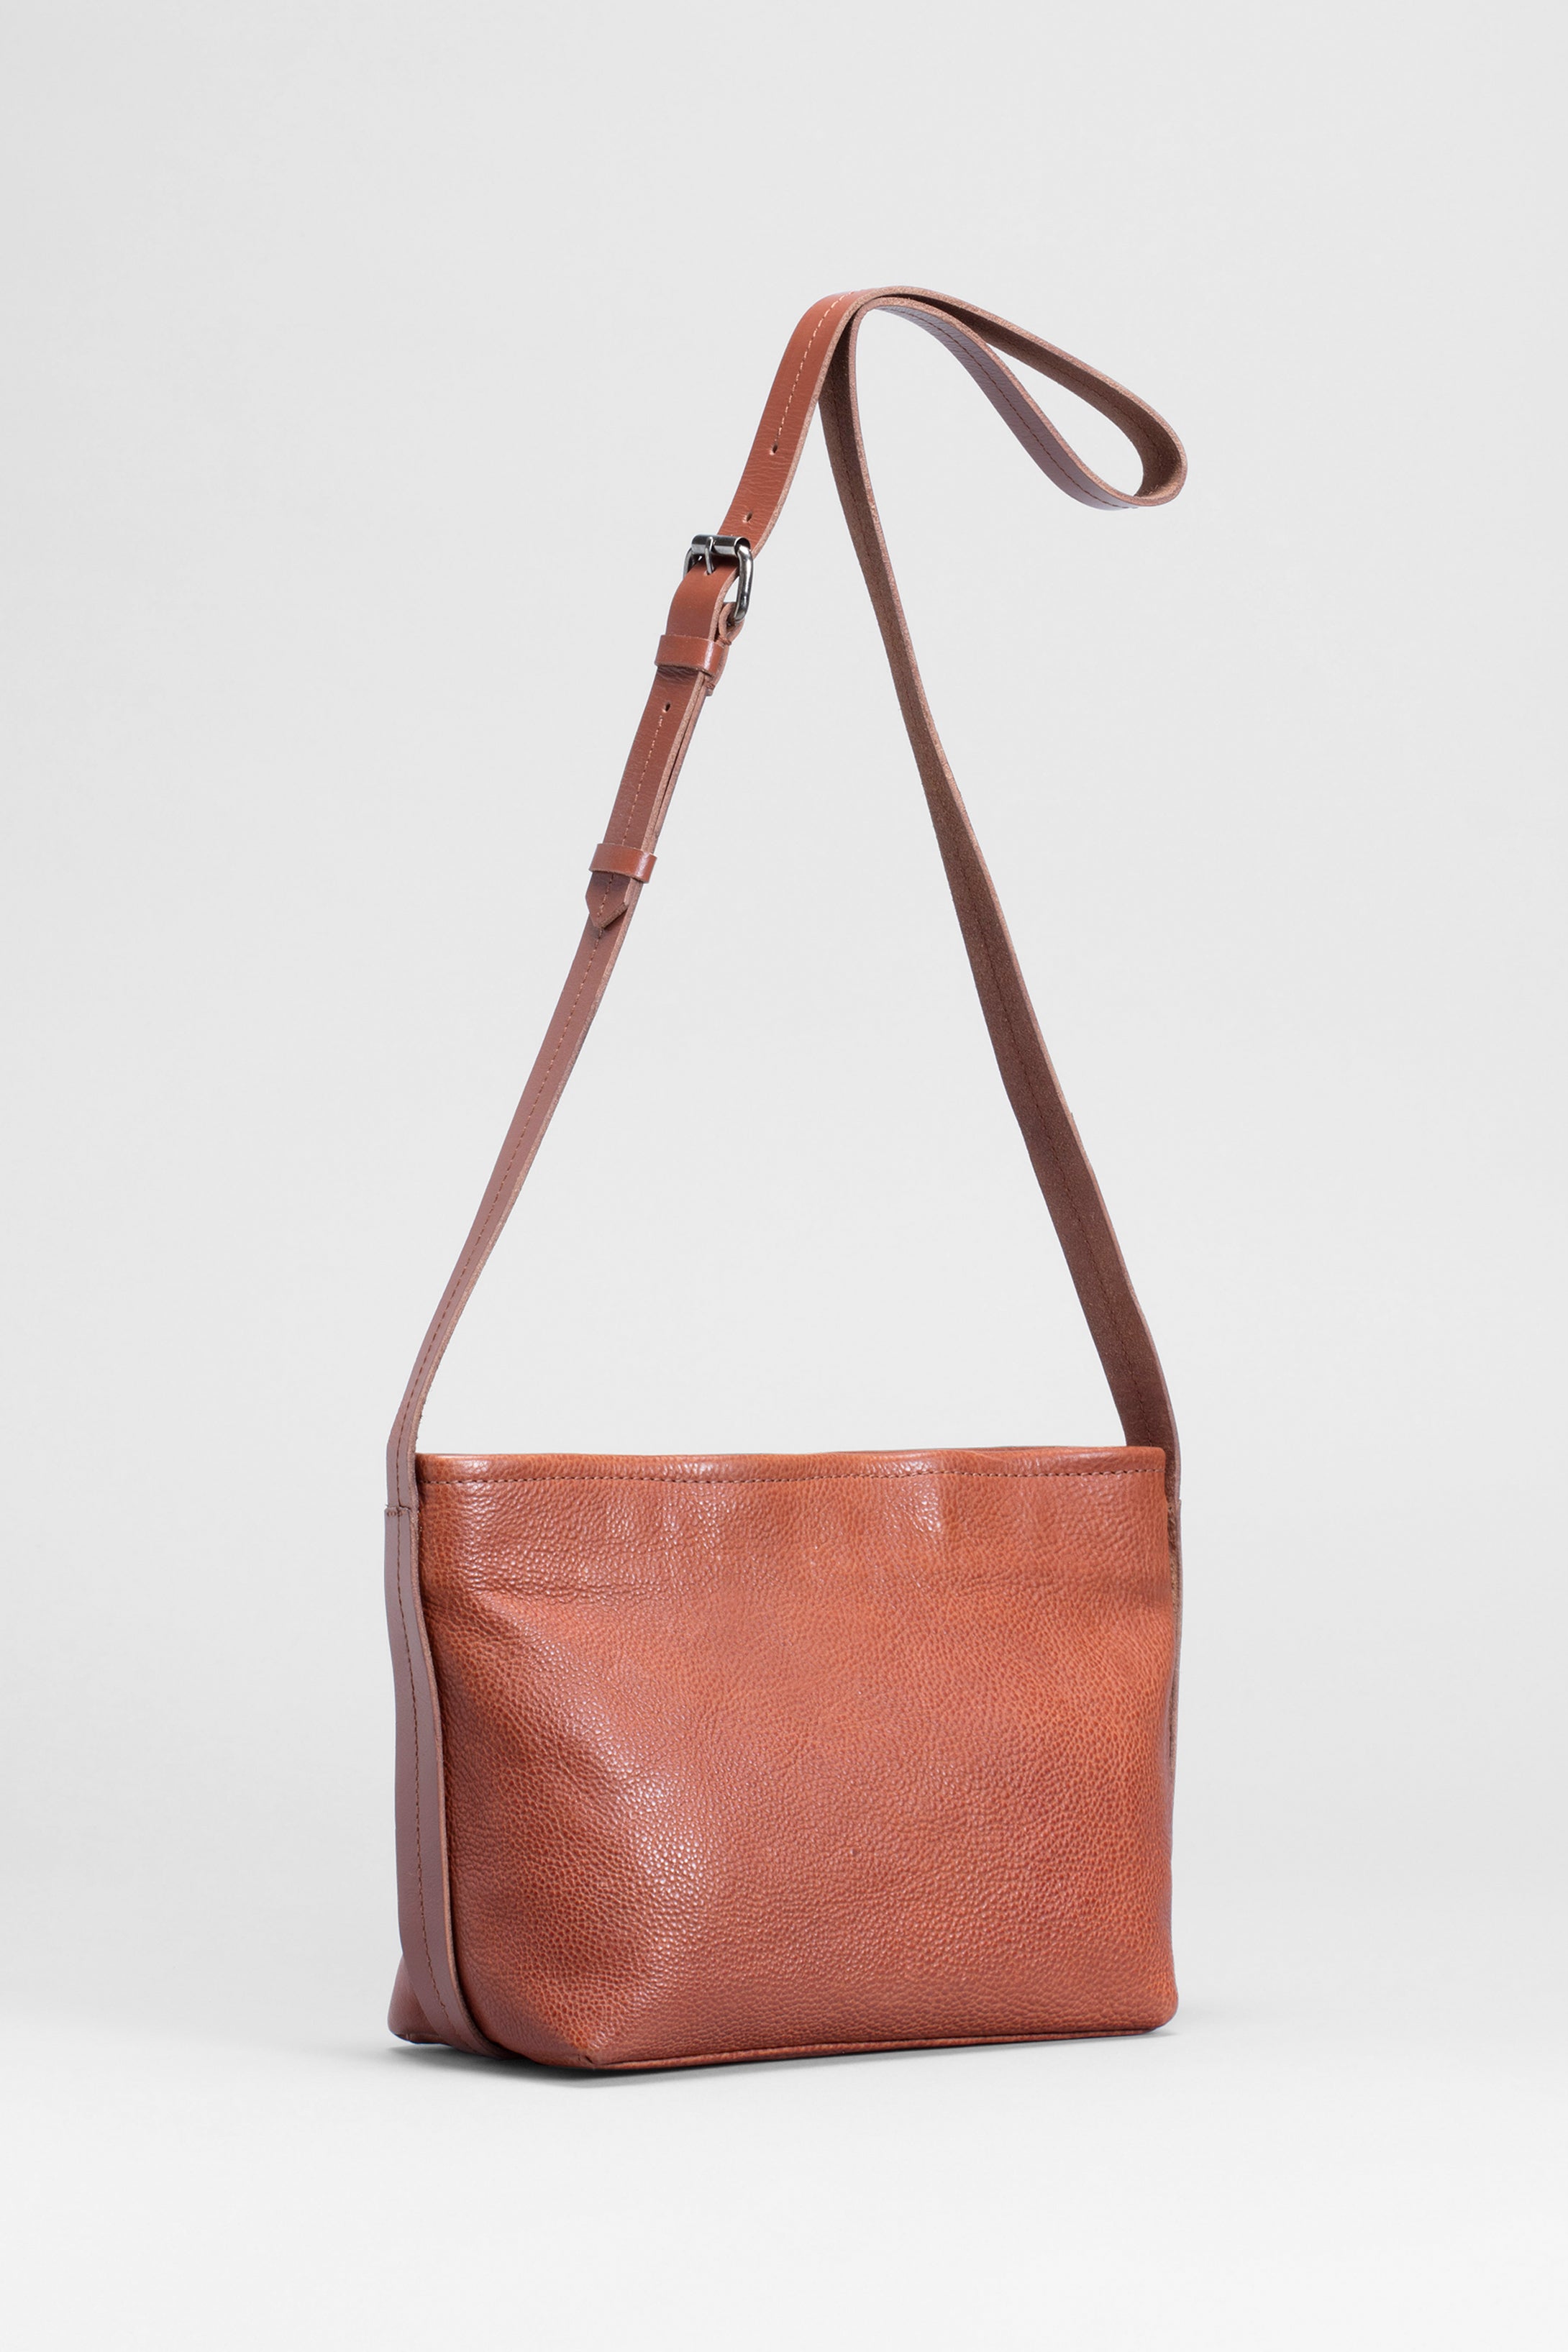 Canutte Leather Bag Front | TAN / TAN